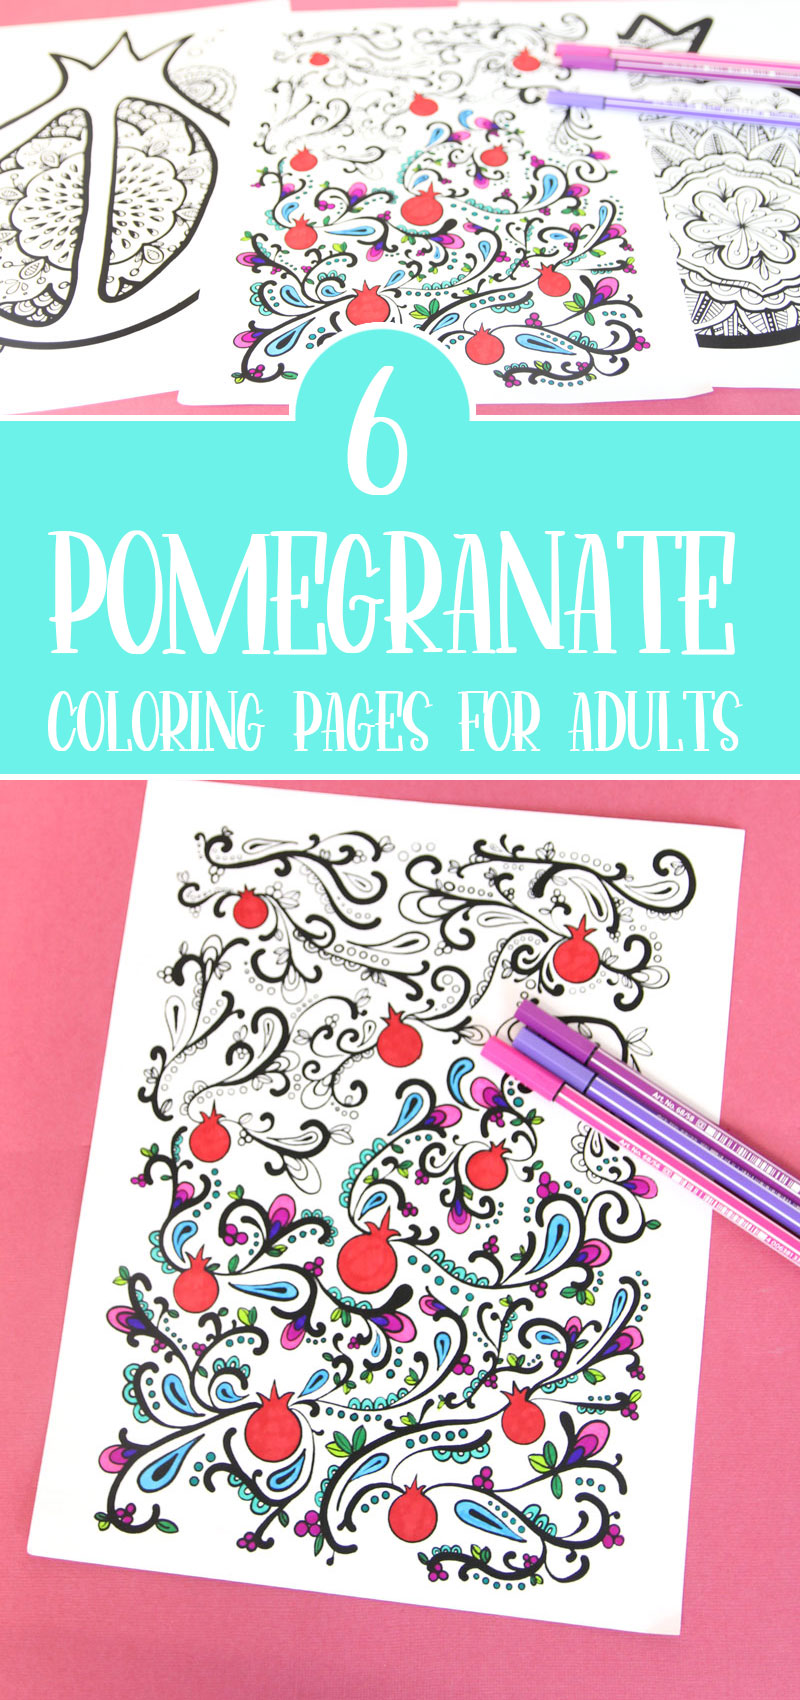 pomegranate coloring pages cover image with text